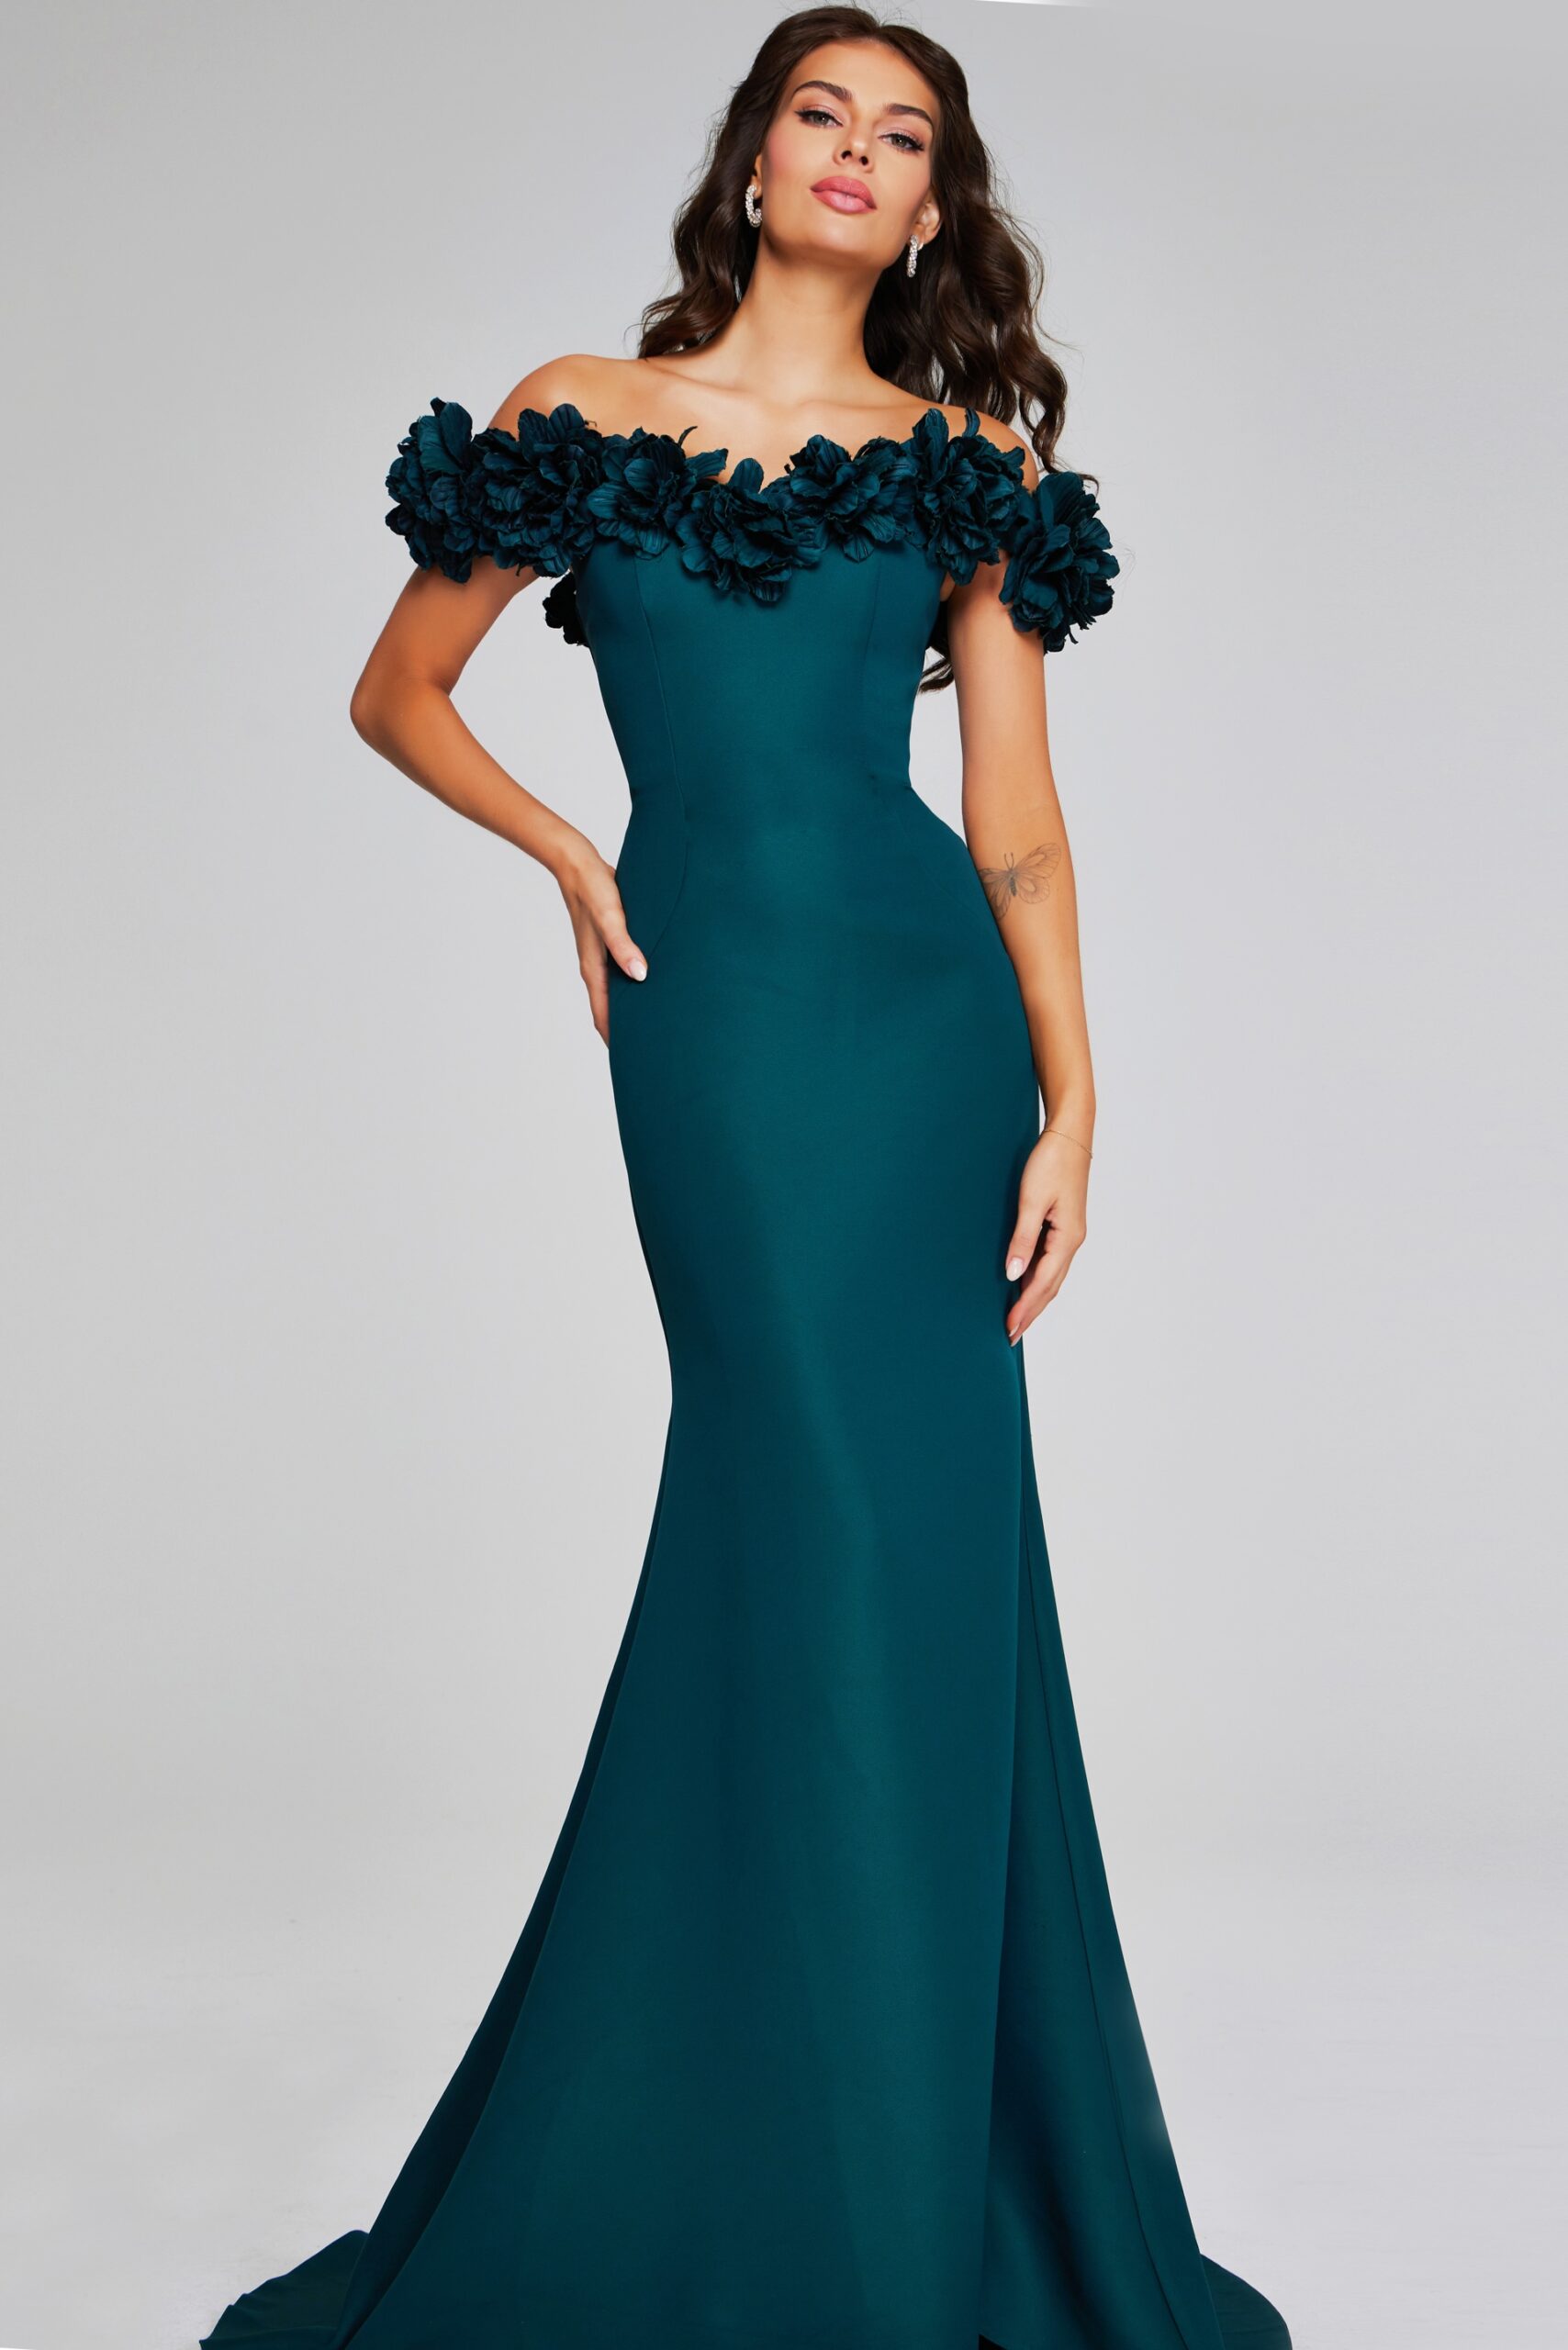 Model wearing Enchanting Emerald Off-Shoulder Gown with Floral Embellishments 40595